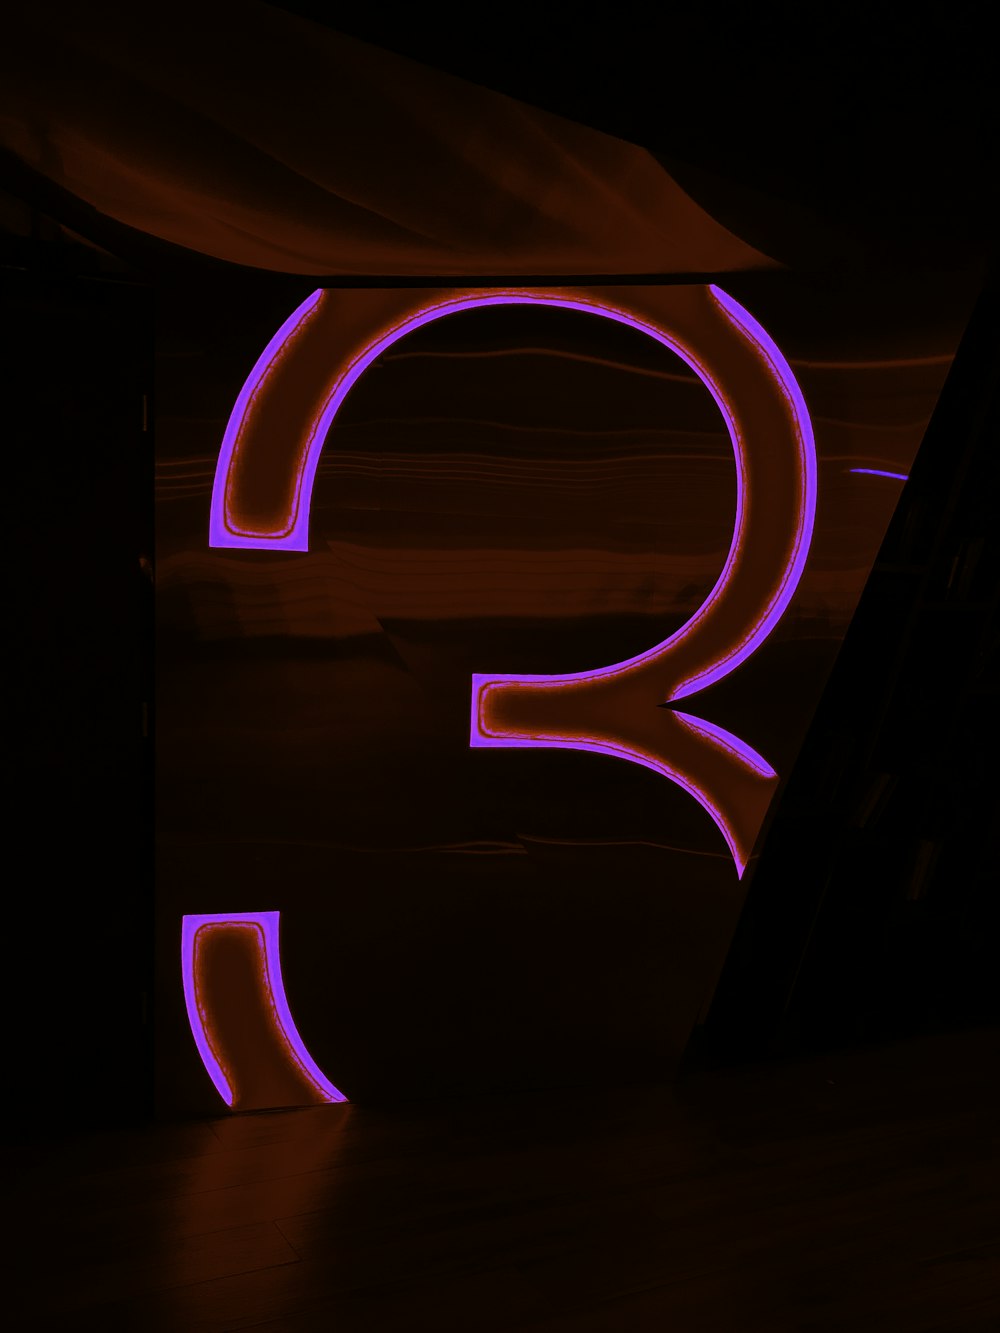 the letter q is lit up in the dark